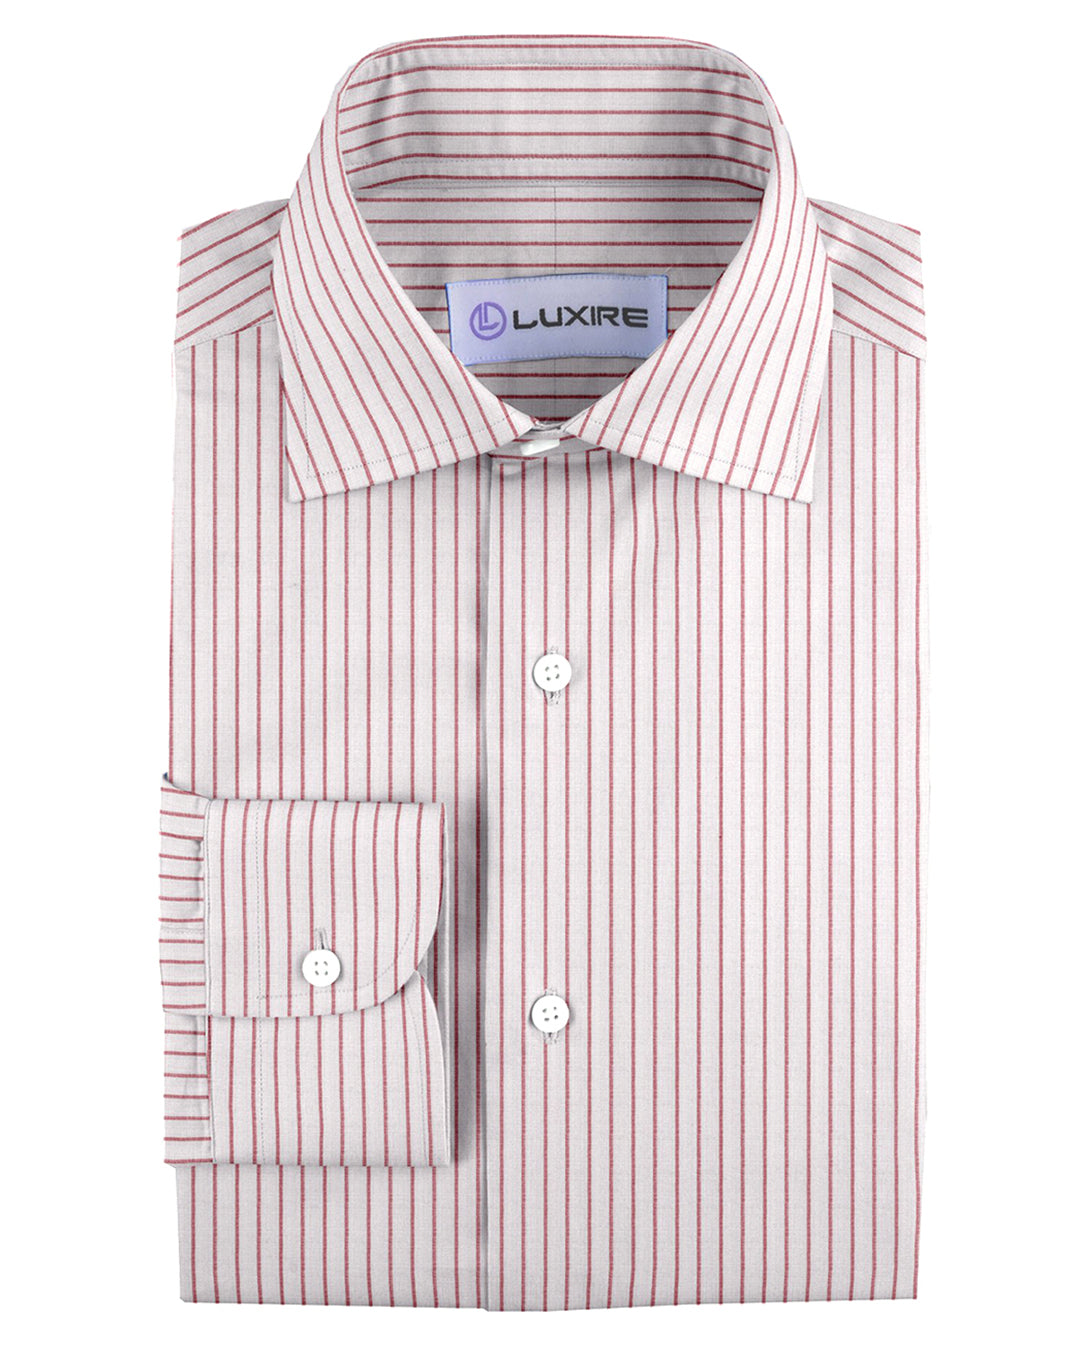 Front of the custom linen shirt for men in white and red pinstripes by Luxire Clothing